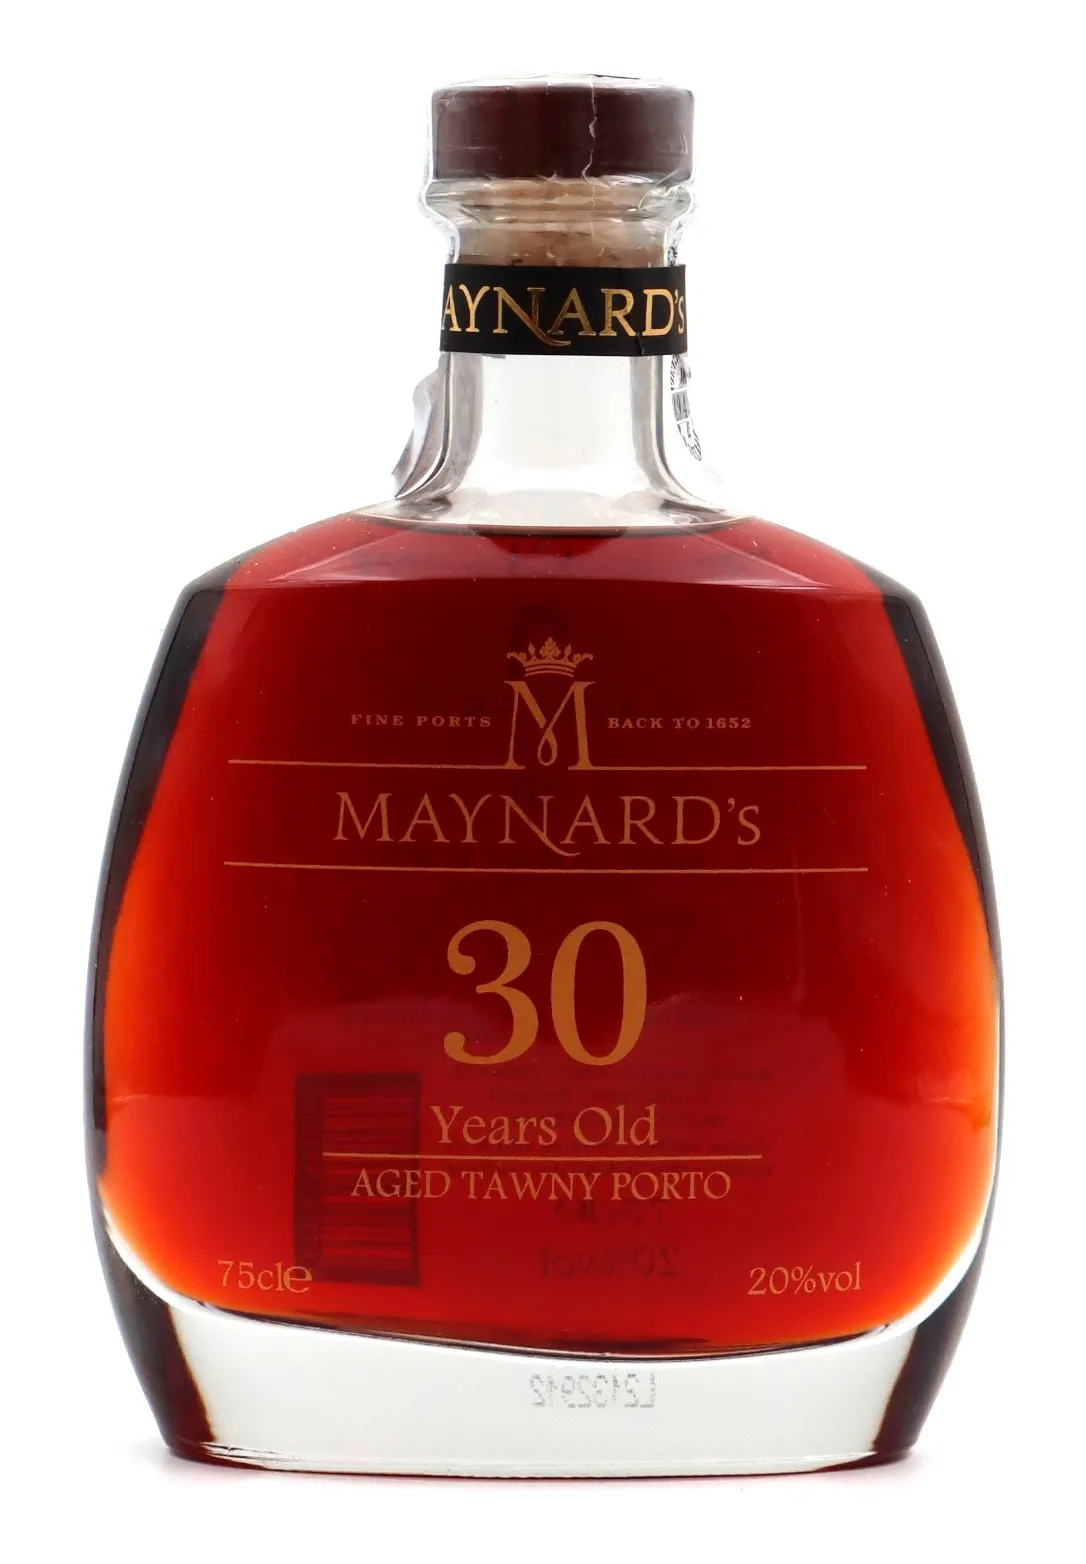 Bottle of Maynard's 30 Years Old Aged Tawny Porto from search results